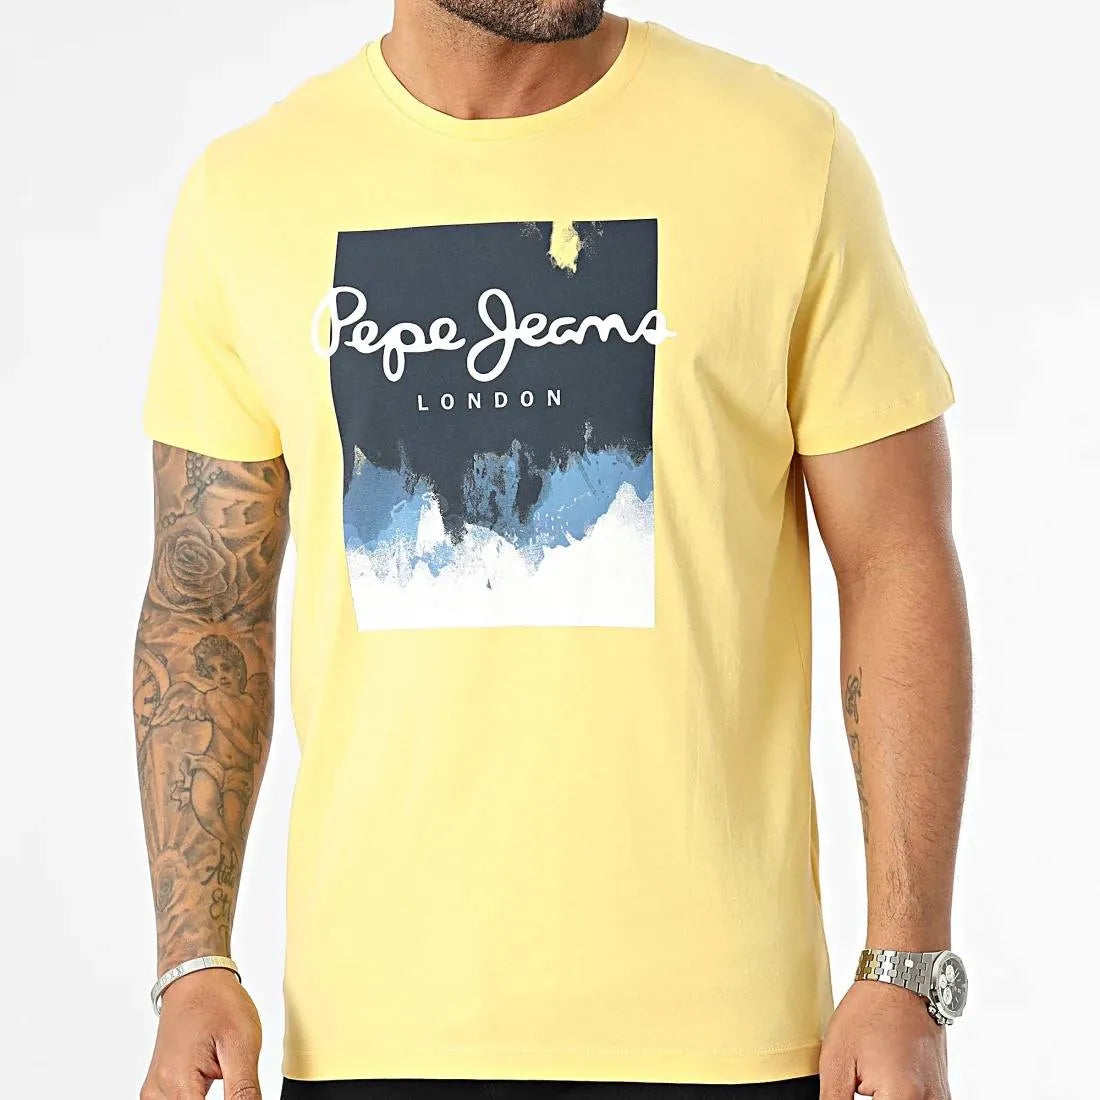  Crafted for comfort,Pepe Jeans Roslyn T-Shirt: Gear up for sunny days with this light and breezy t-shirt (PM508713).Stay cool and comfortable in this casual Pepe Jeans t-shirt, perfect for warm weather